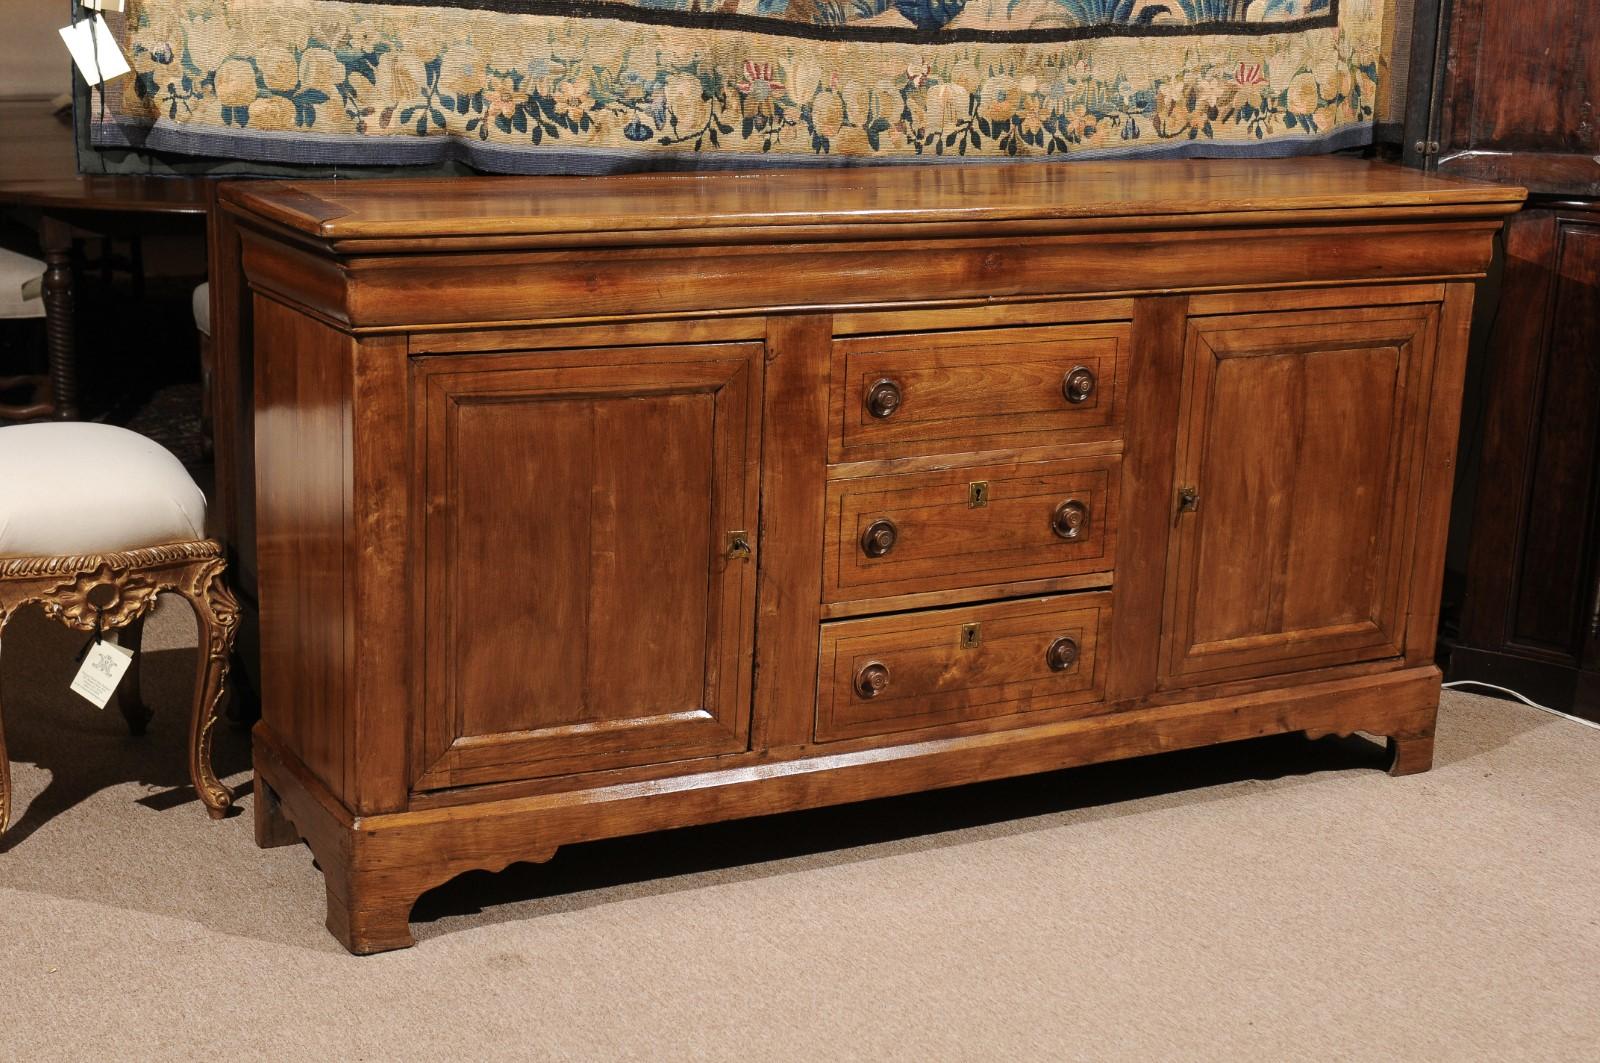 The French Louis Philippe style fruitwood Enfilade with ebonized string inlay, 3 drawers with turned wooden knobs, 2 flanking cabinets ending in bracket feet.